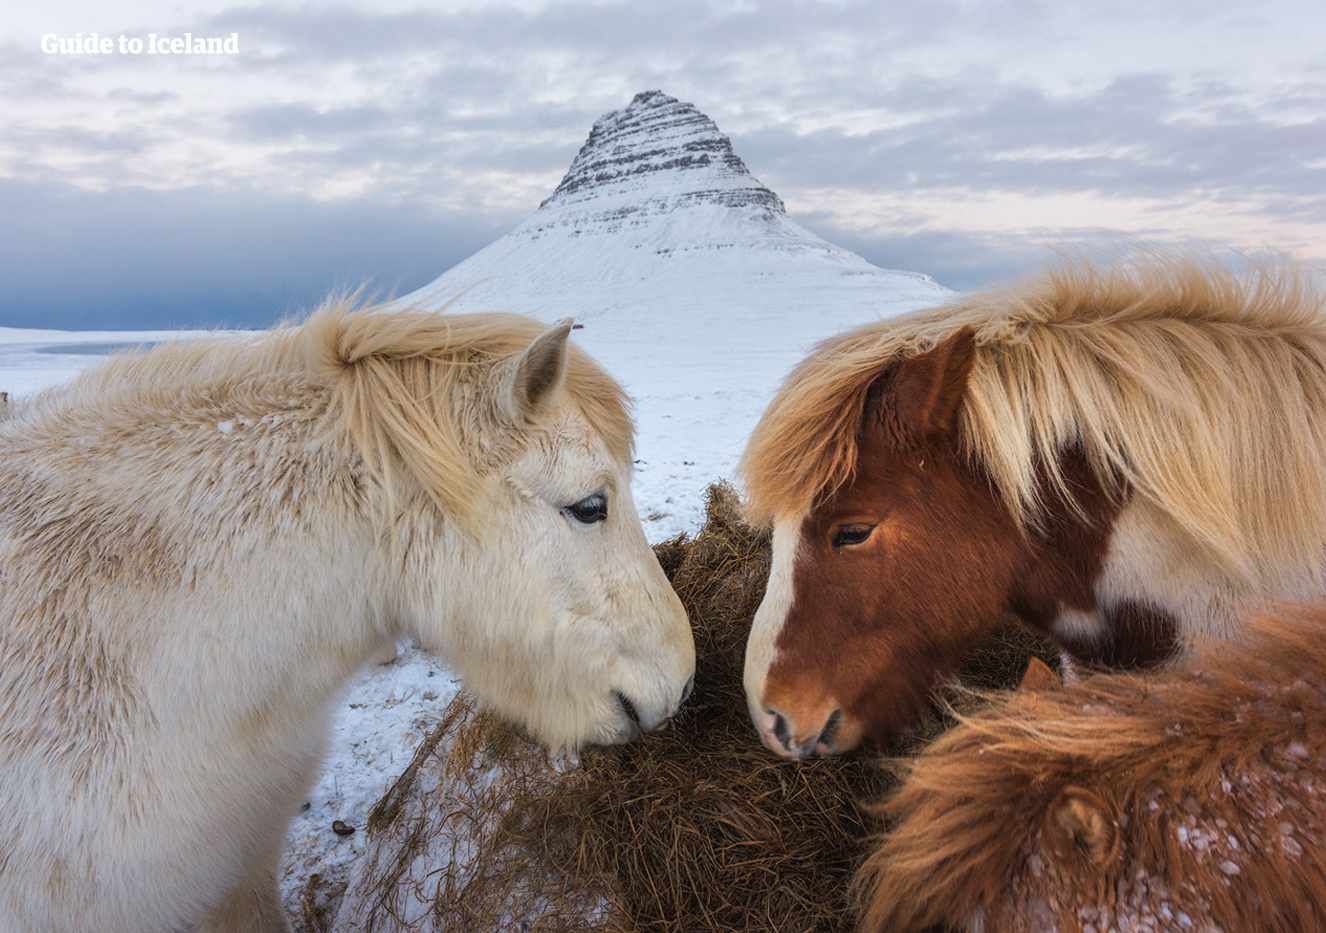 Icelandic horses in front of the majestic Kirkjufell mountain on the Snæfellsnes Peninsula.